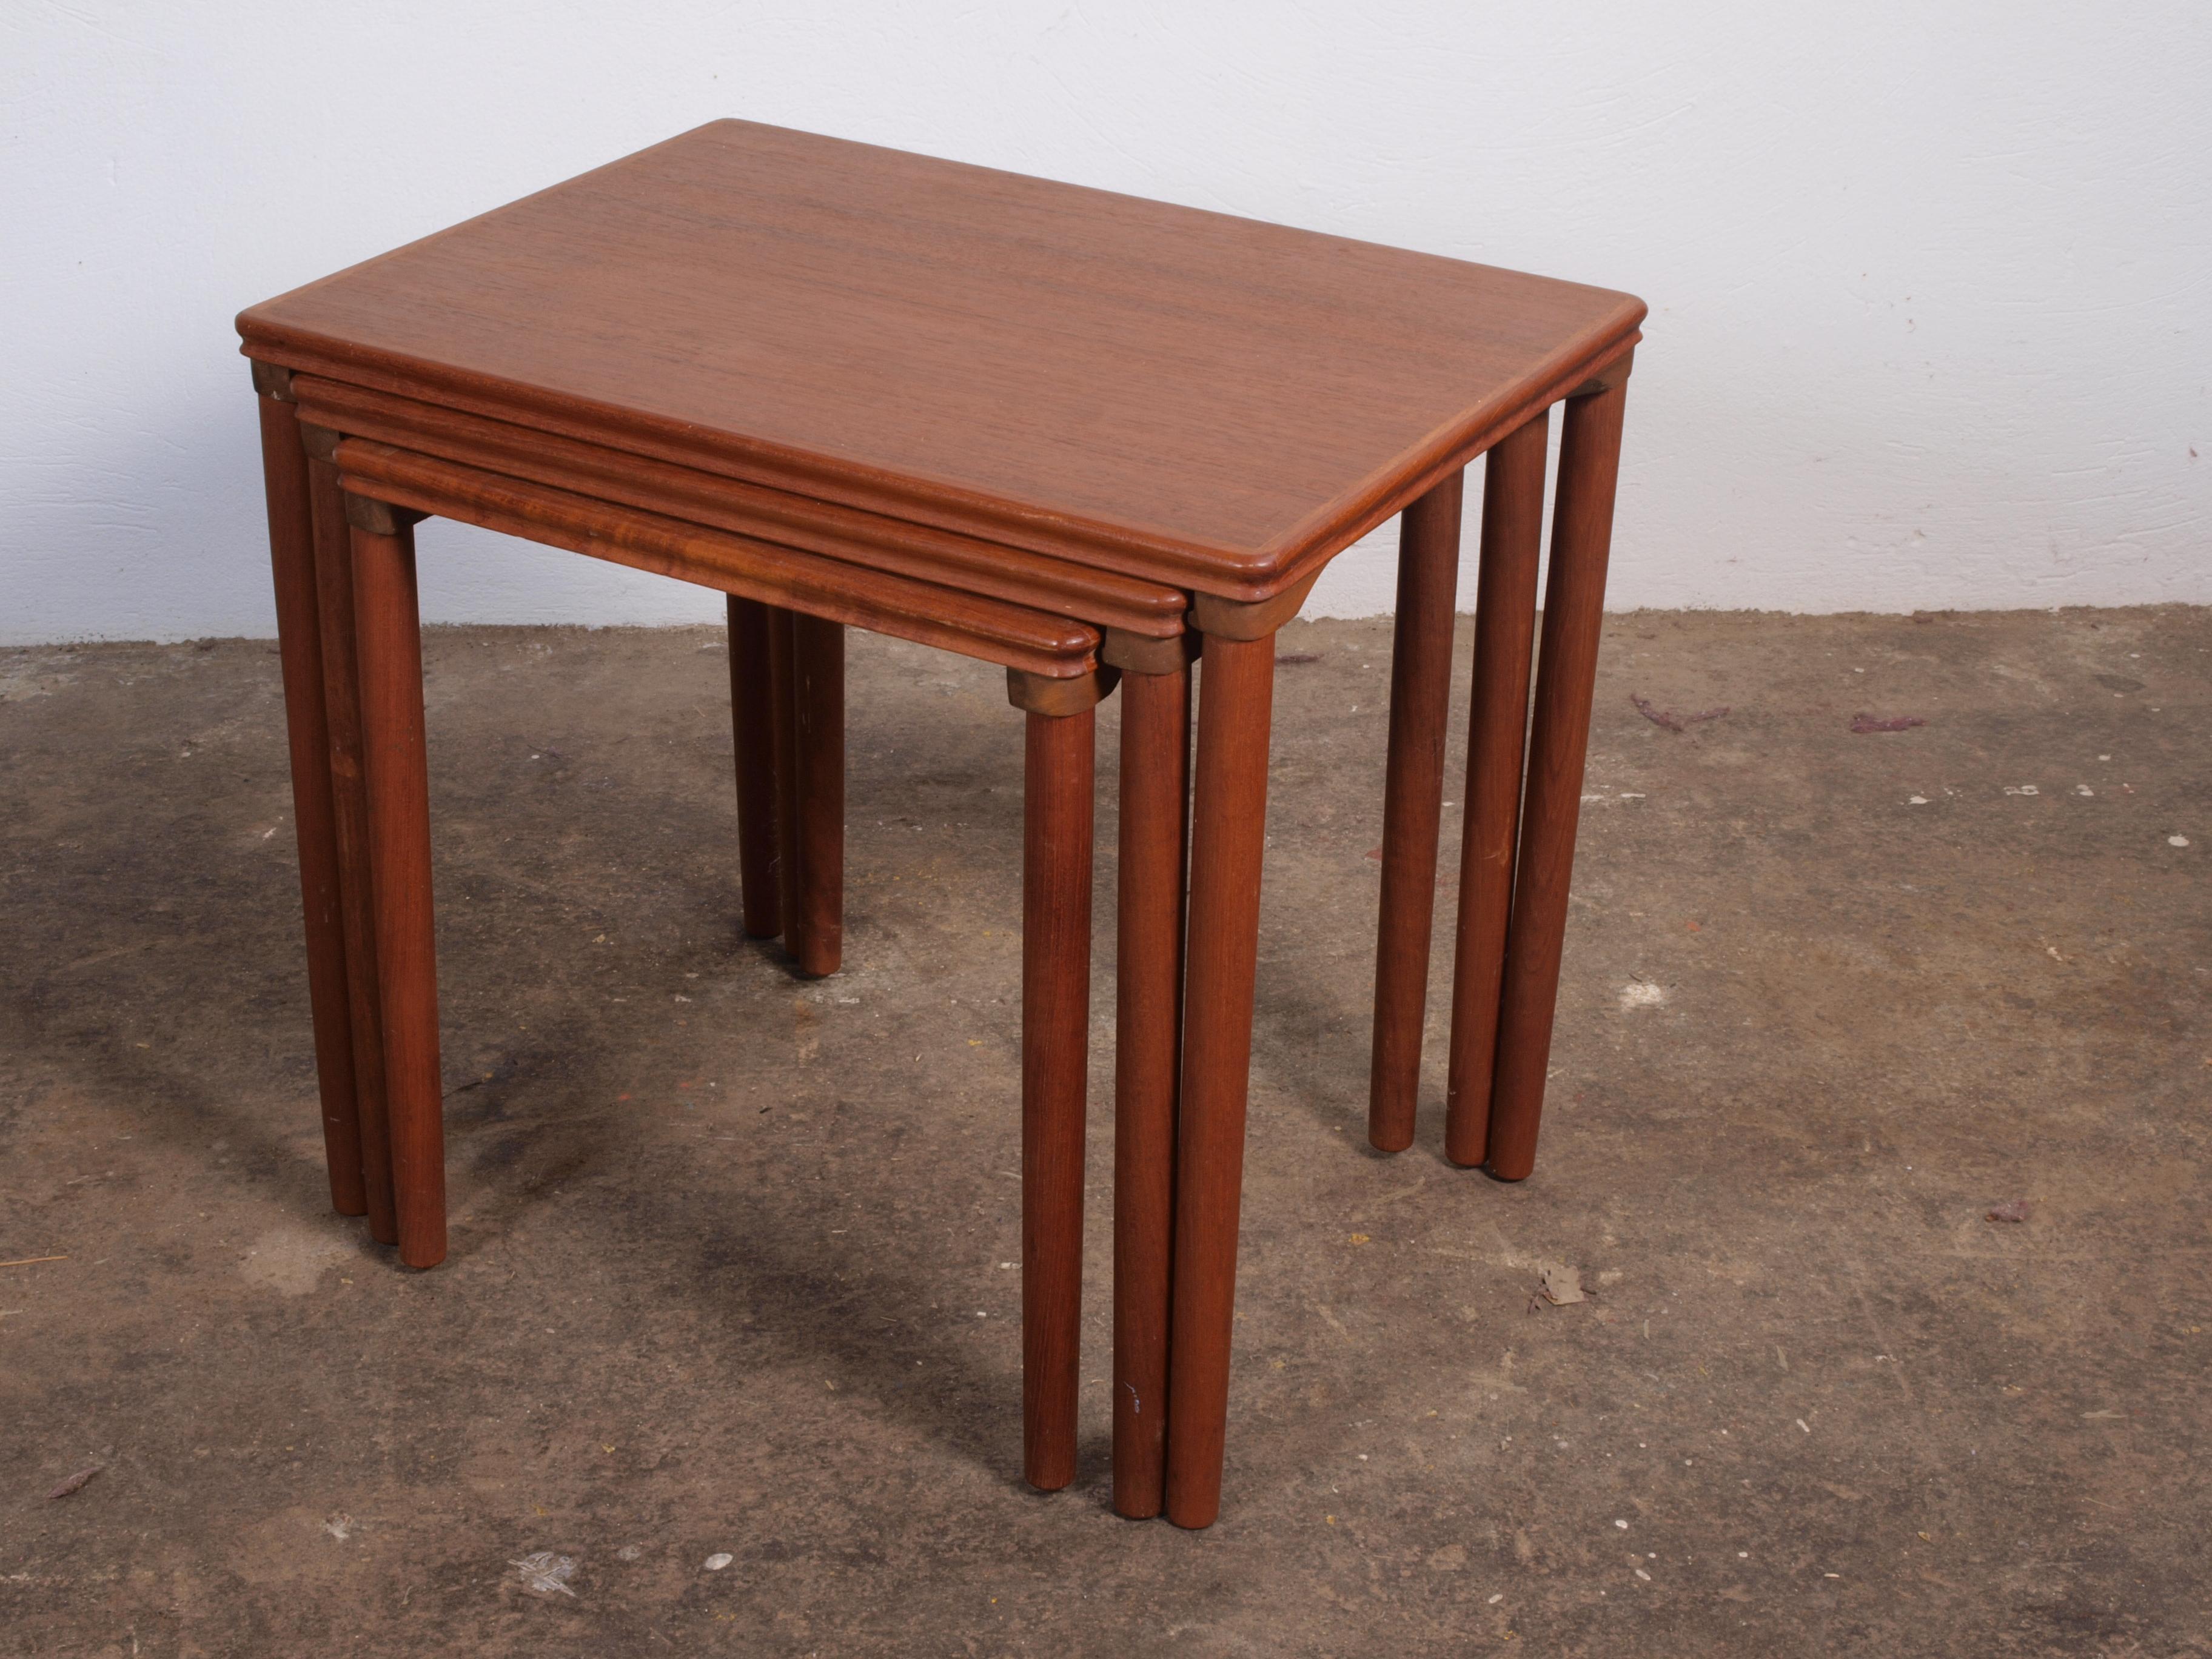 E.W. Bach-designed teak nesting tables from Toften Møbelfabrik, crafted in the 1960s. These tables, in excellent condition, seamlessly fit together. The wood is in very good condition with no tears.

The design allows easy disassembly for